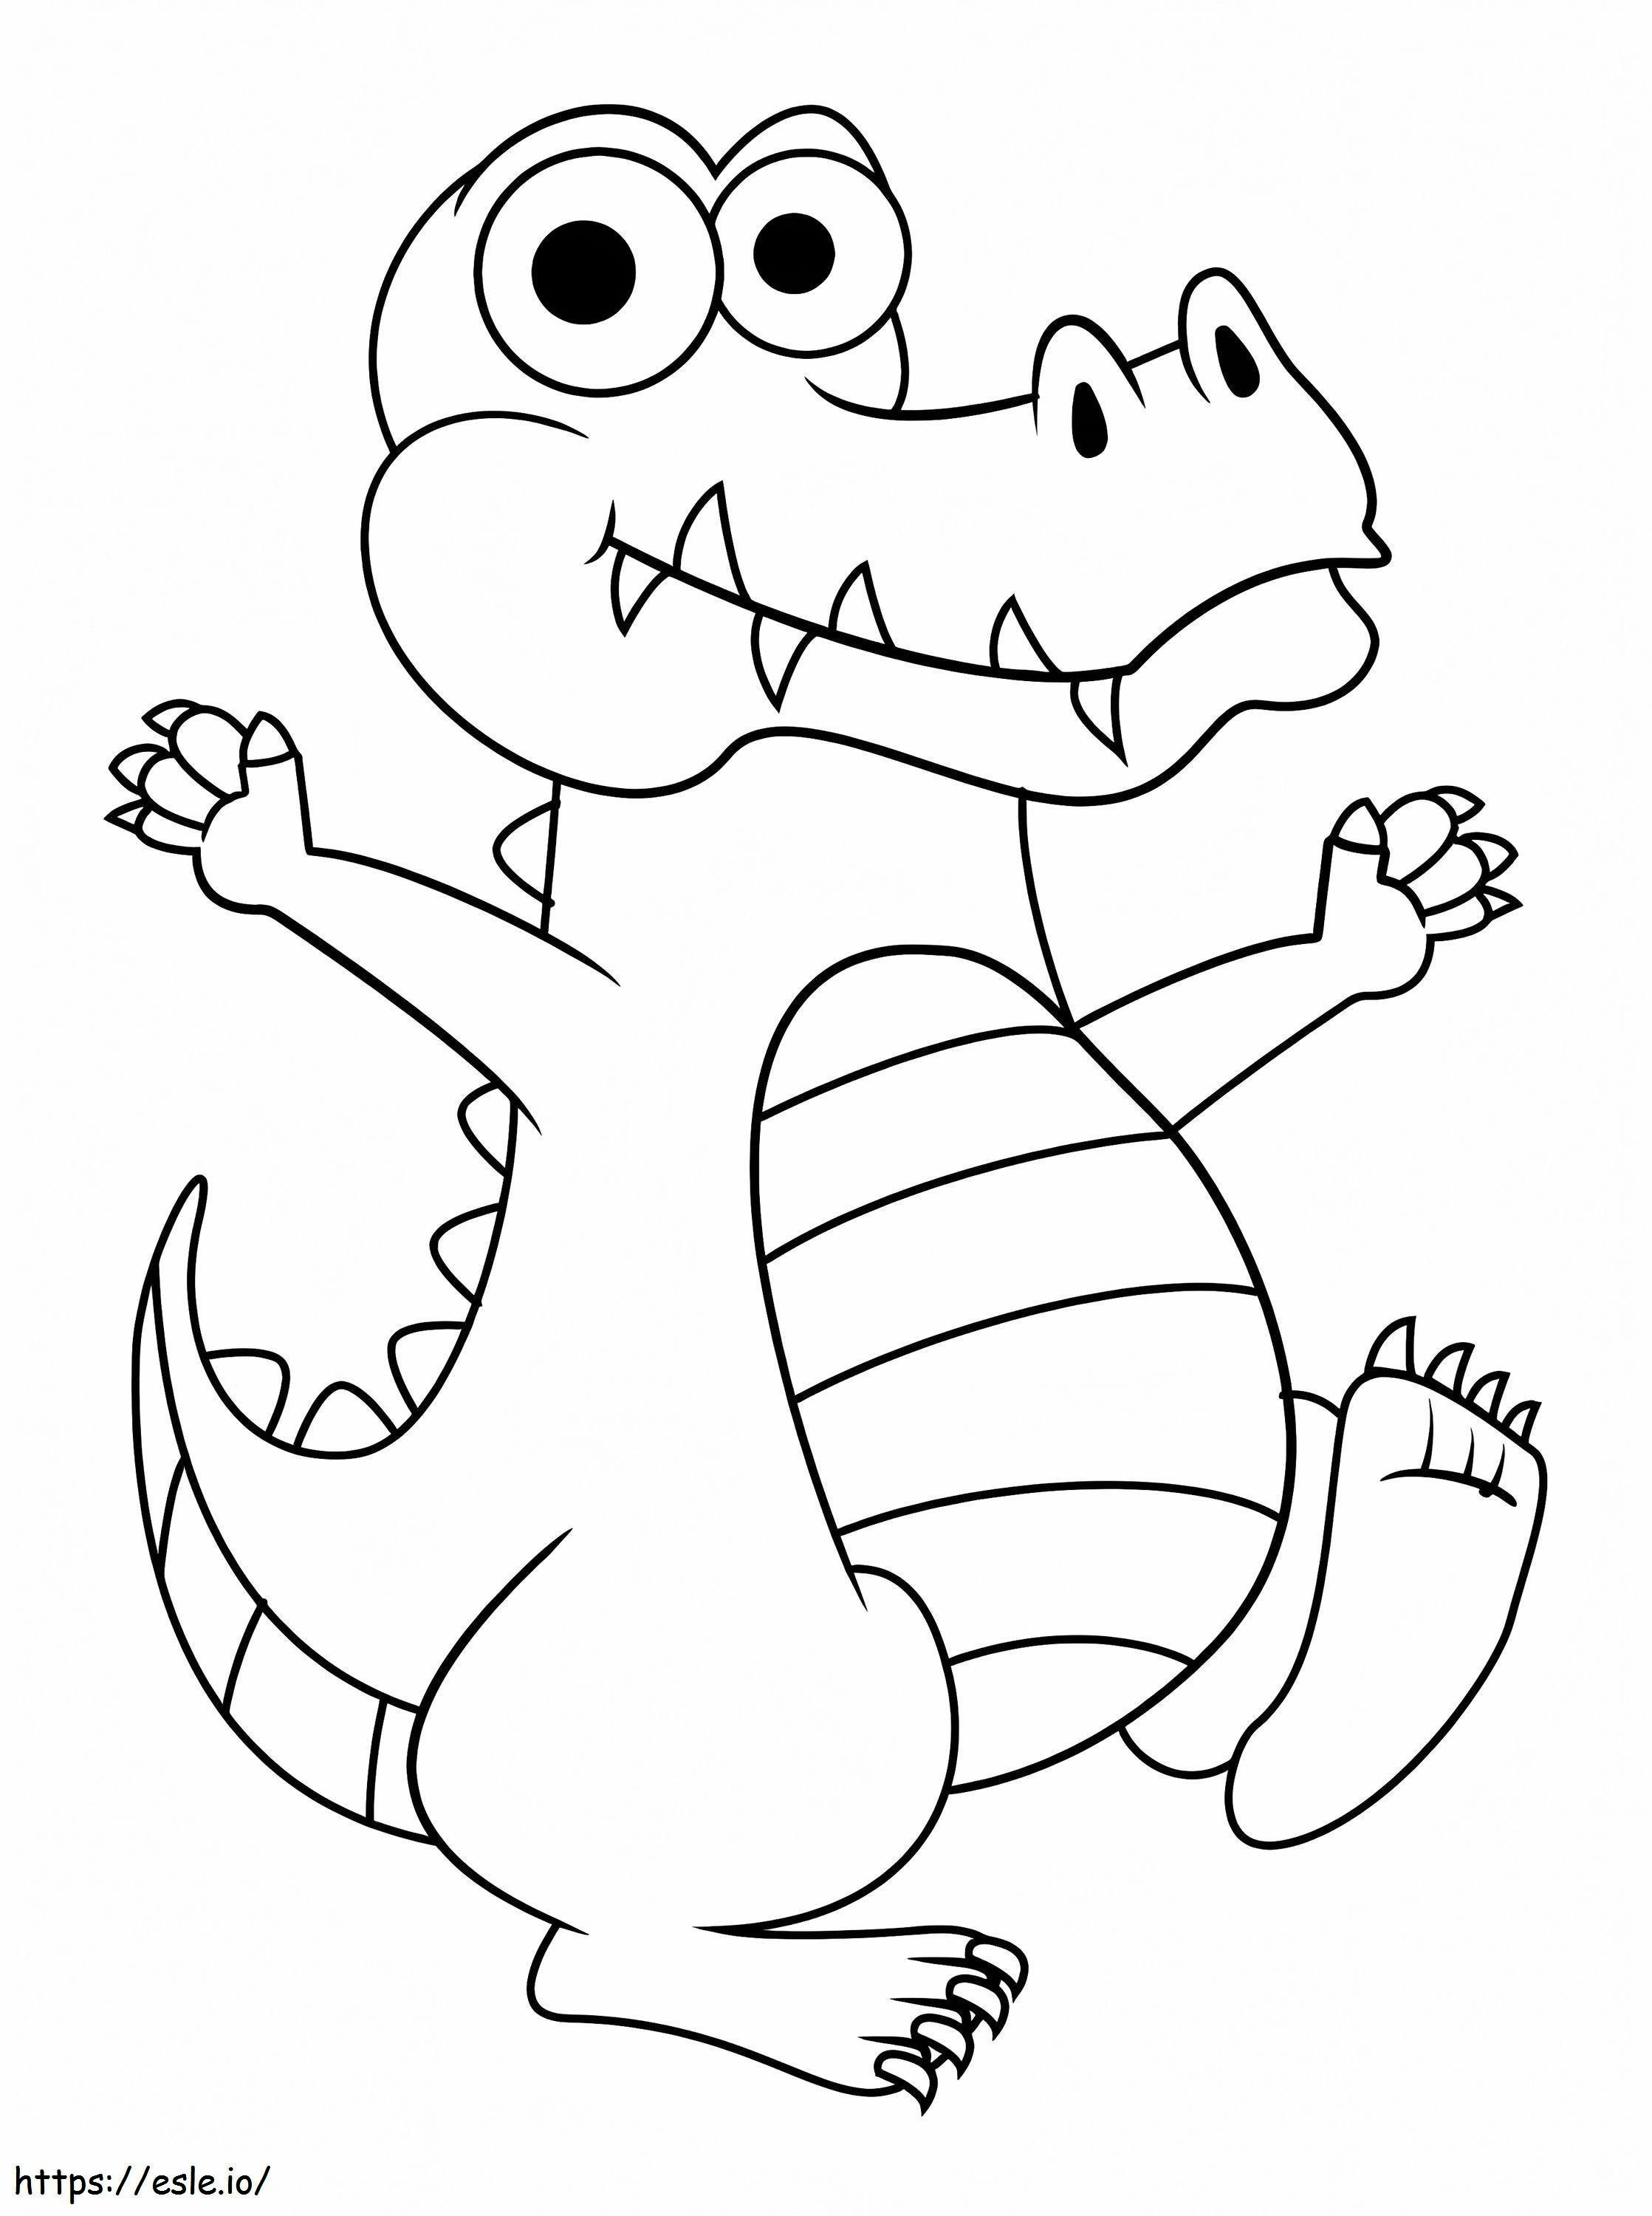 Alligator For Kid coloring page